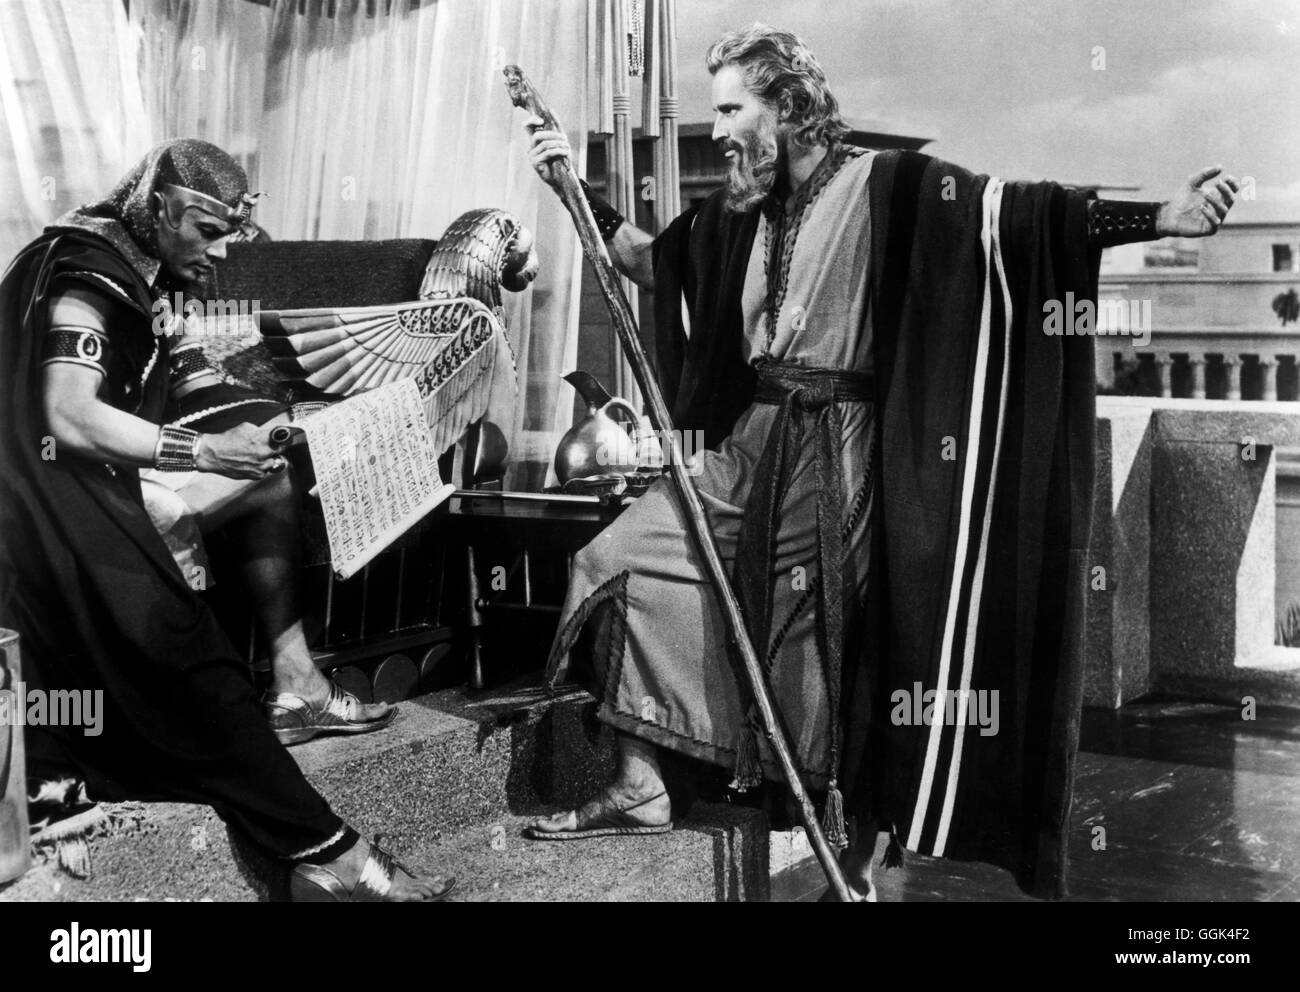 DIE ZEHN GEBOTE / The Ten Commandments USA 1956 / Cecil B. DeMille Ramses (YUL BRYNNER), Moses (CHARLTON HESTON) Regie: Cecil B. DeMille aka. The Ten Commandments Stock Photo